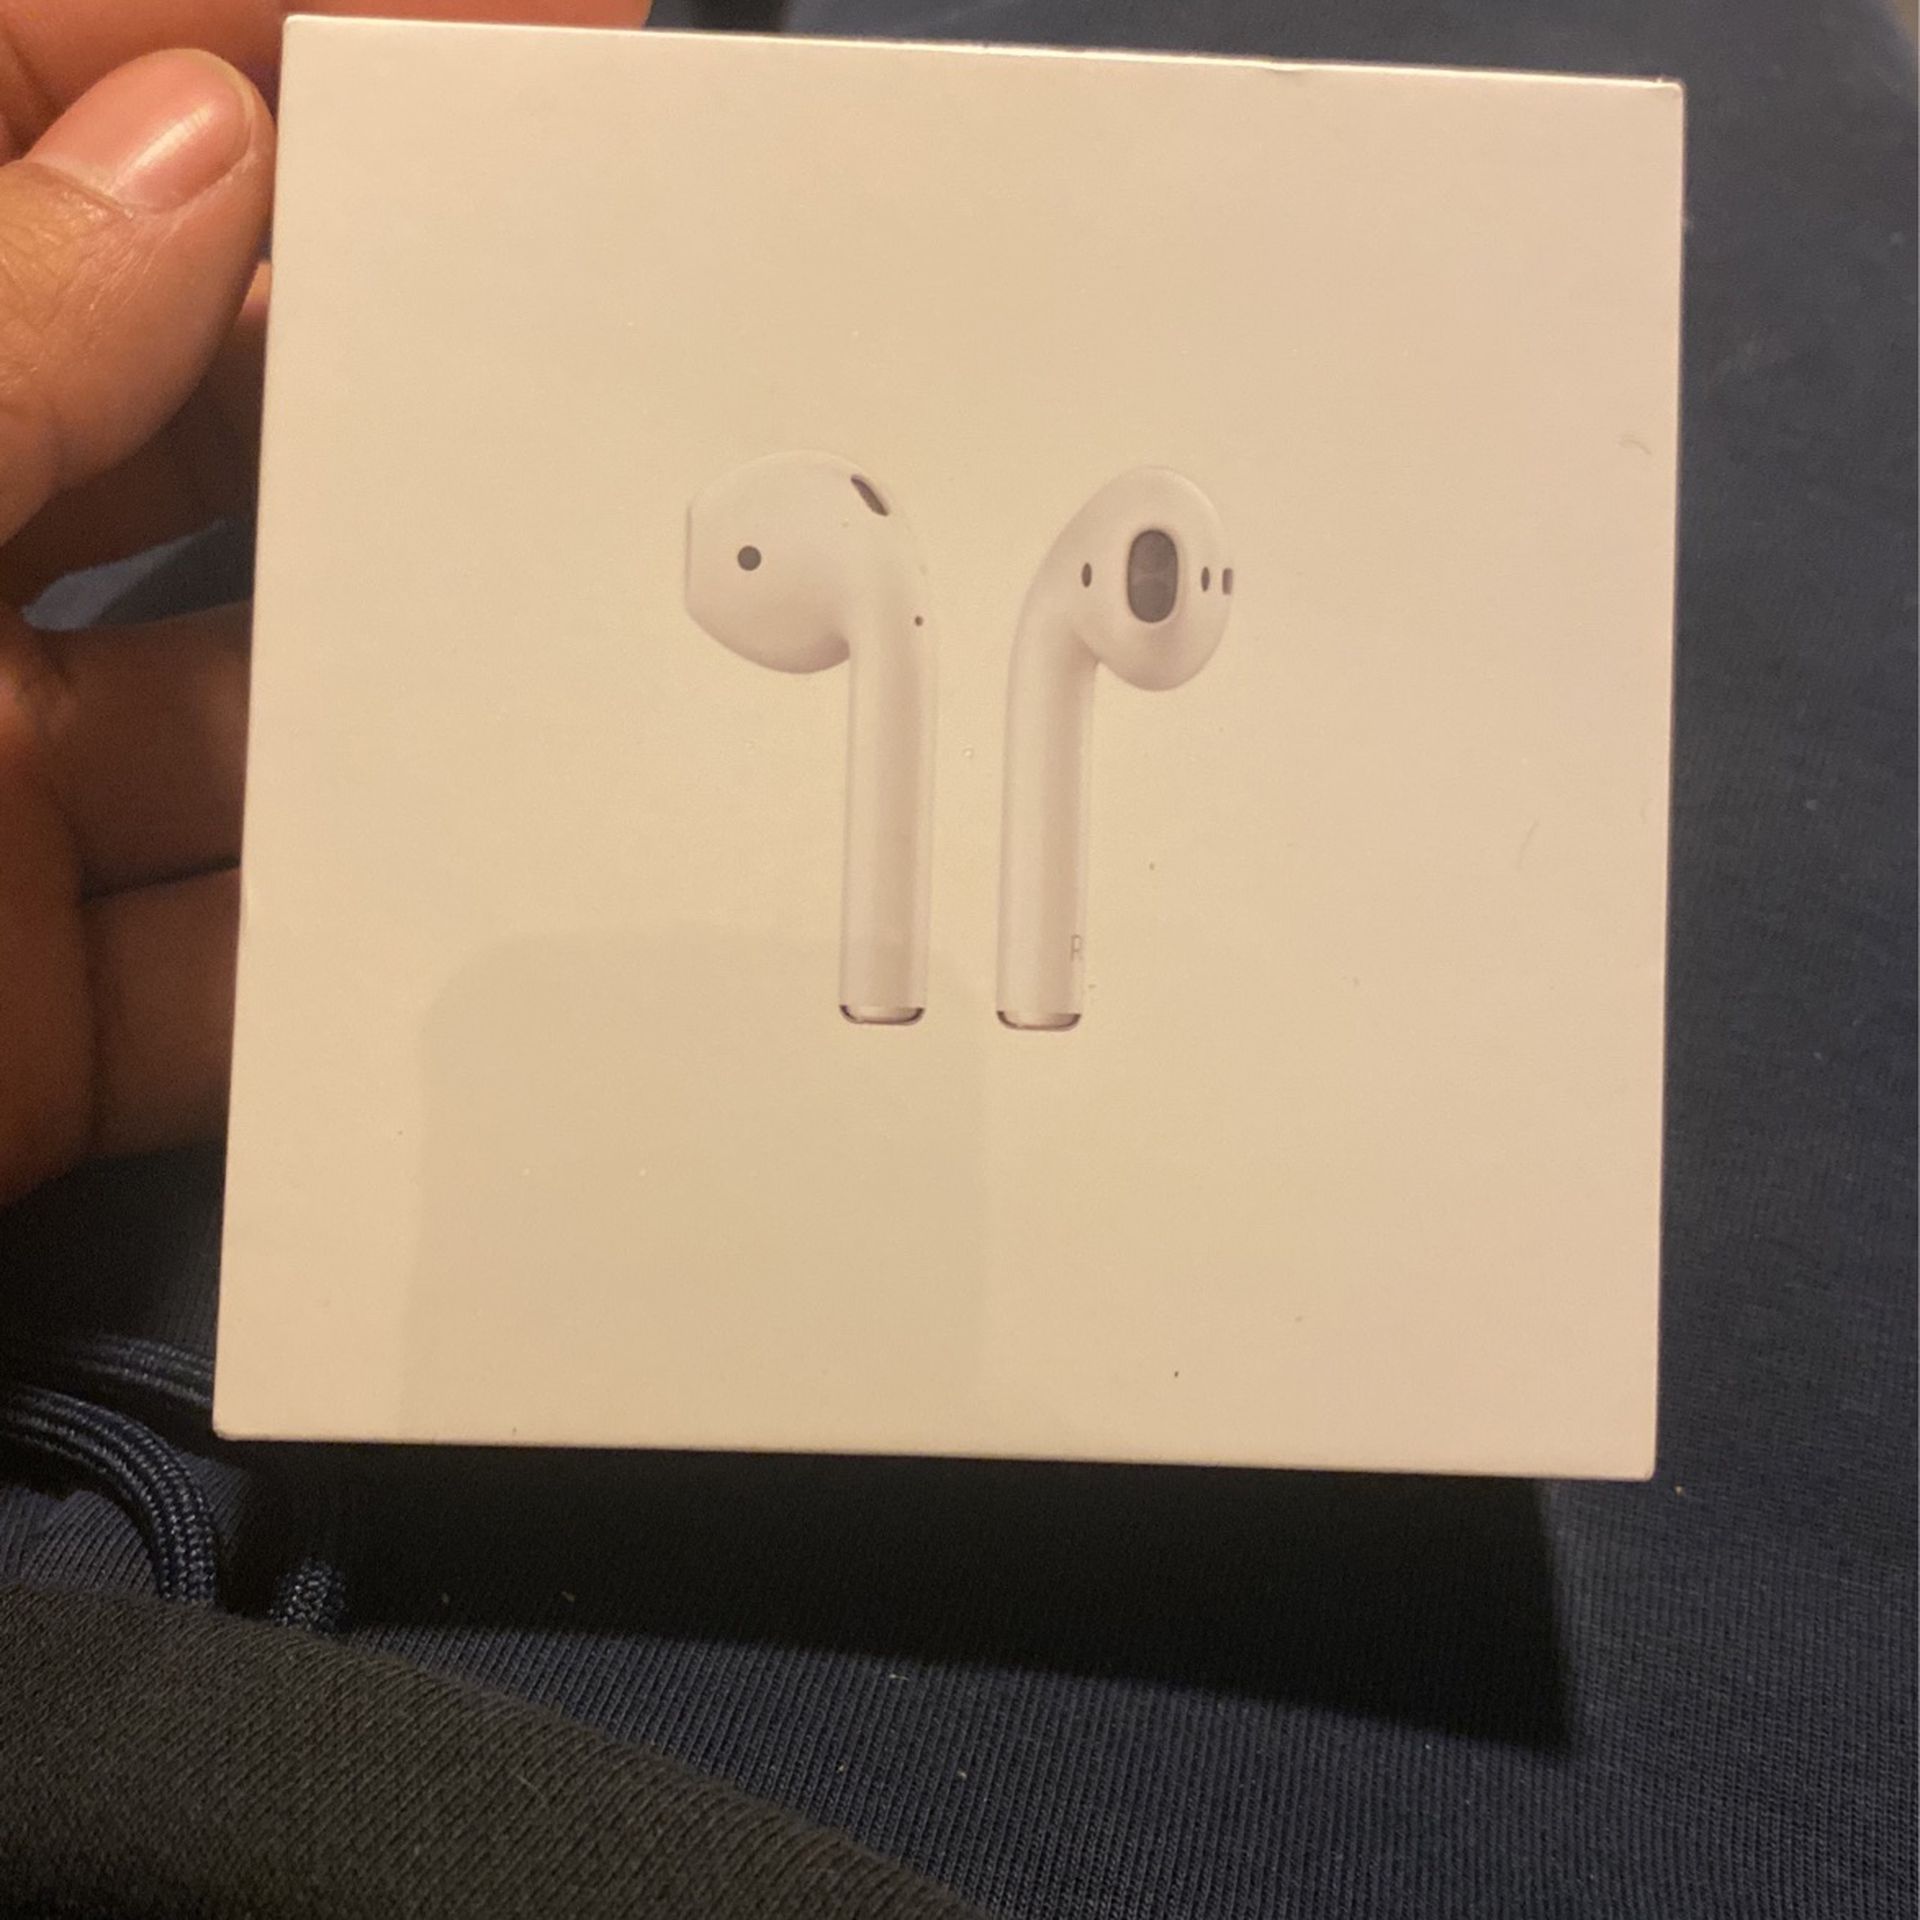 2nd Generation AirPods